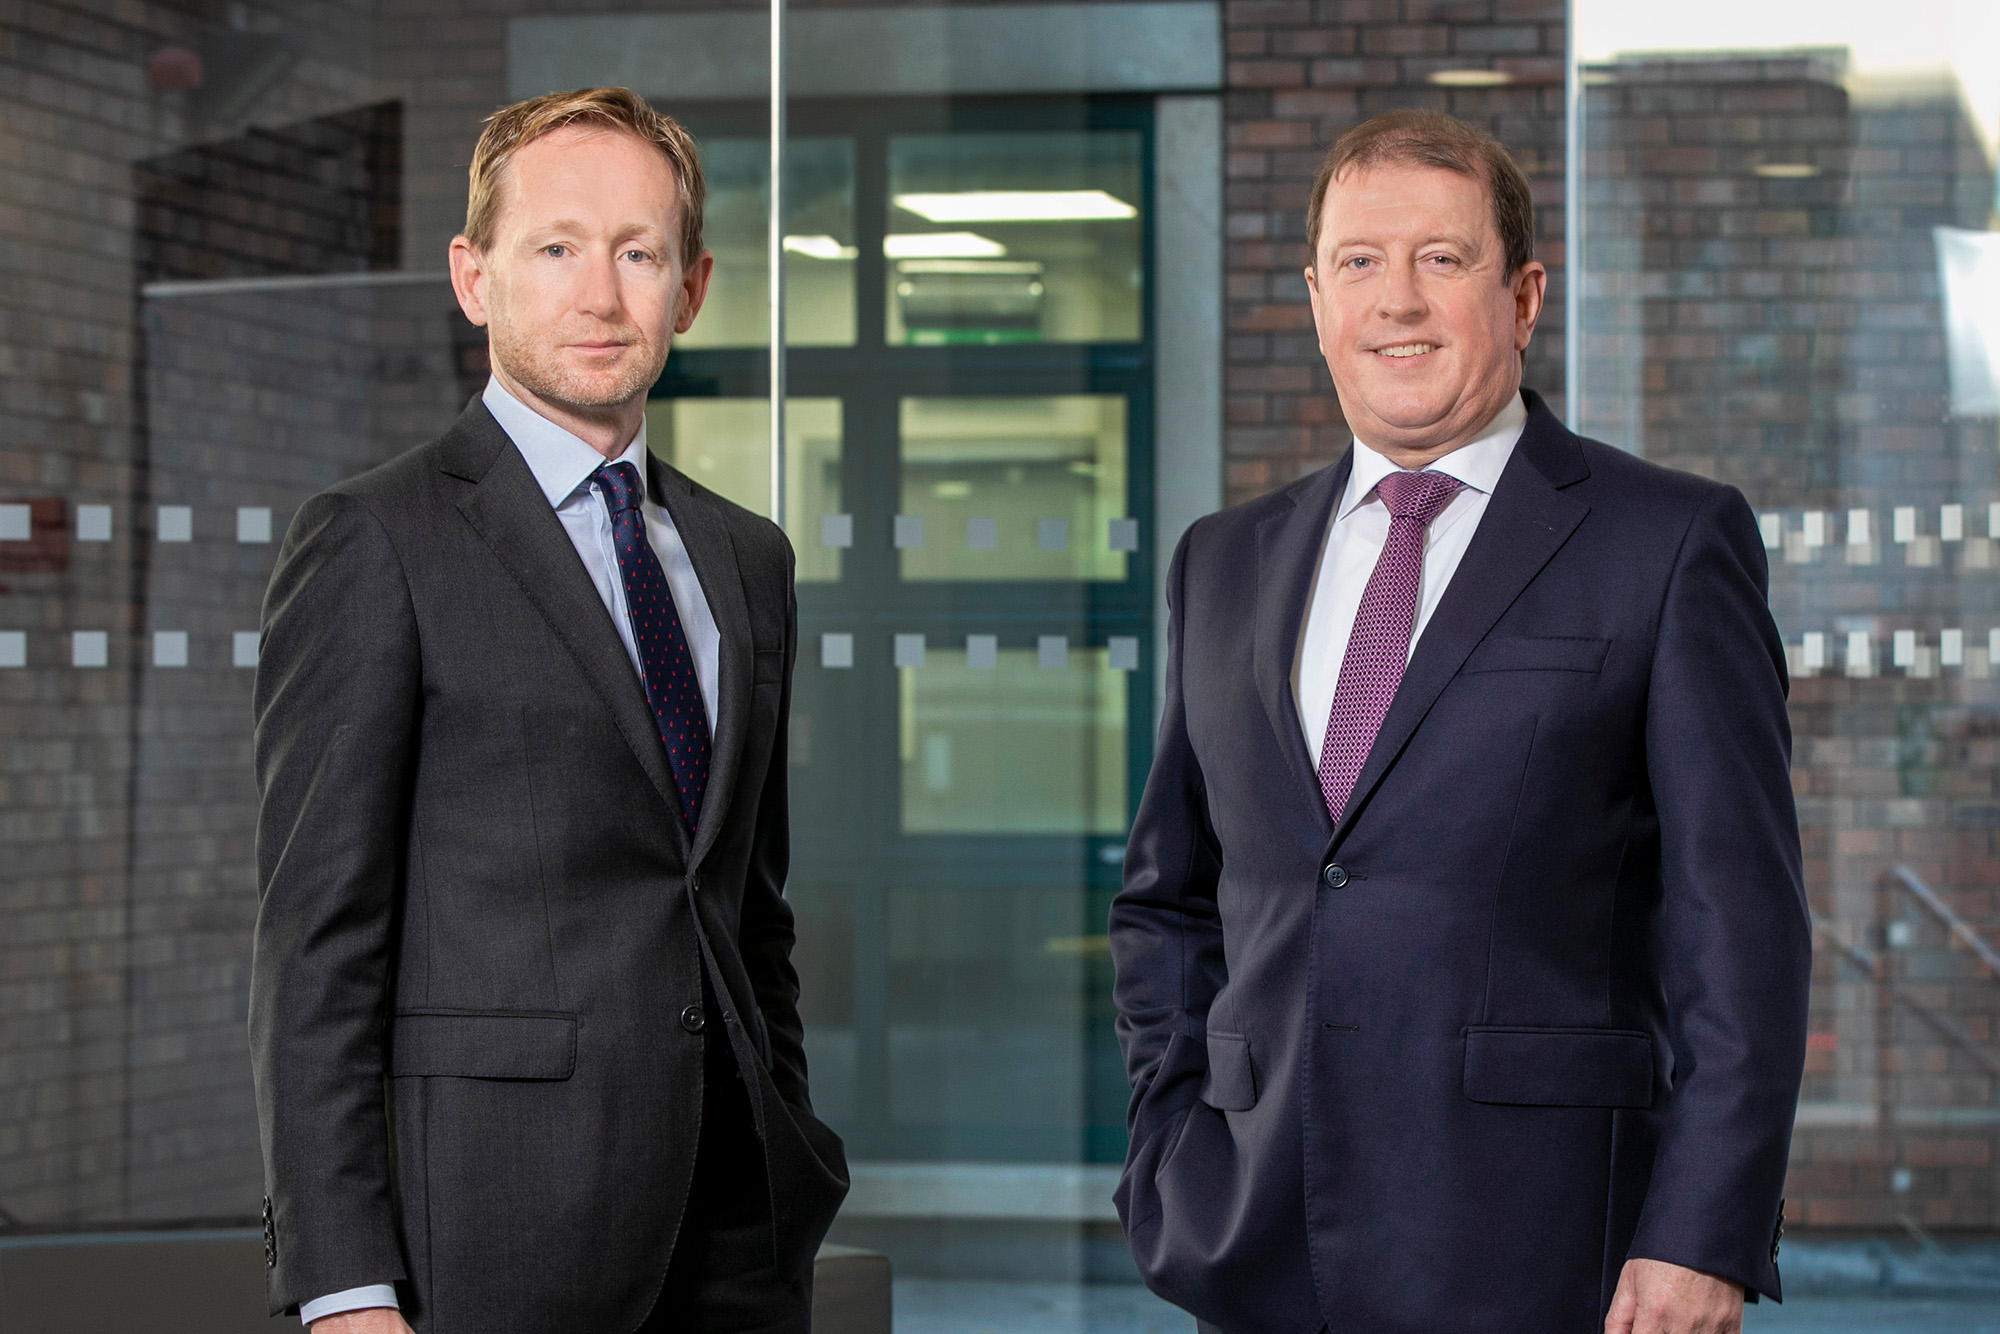 Hayes Solicitors hires Liam Moloney as commercial property partner